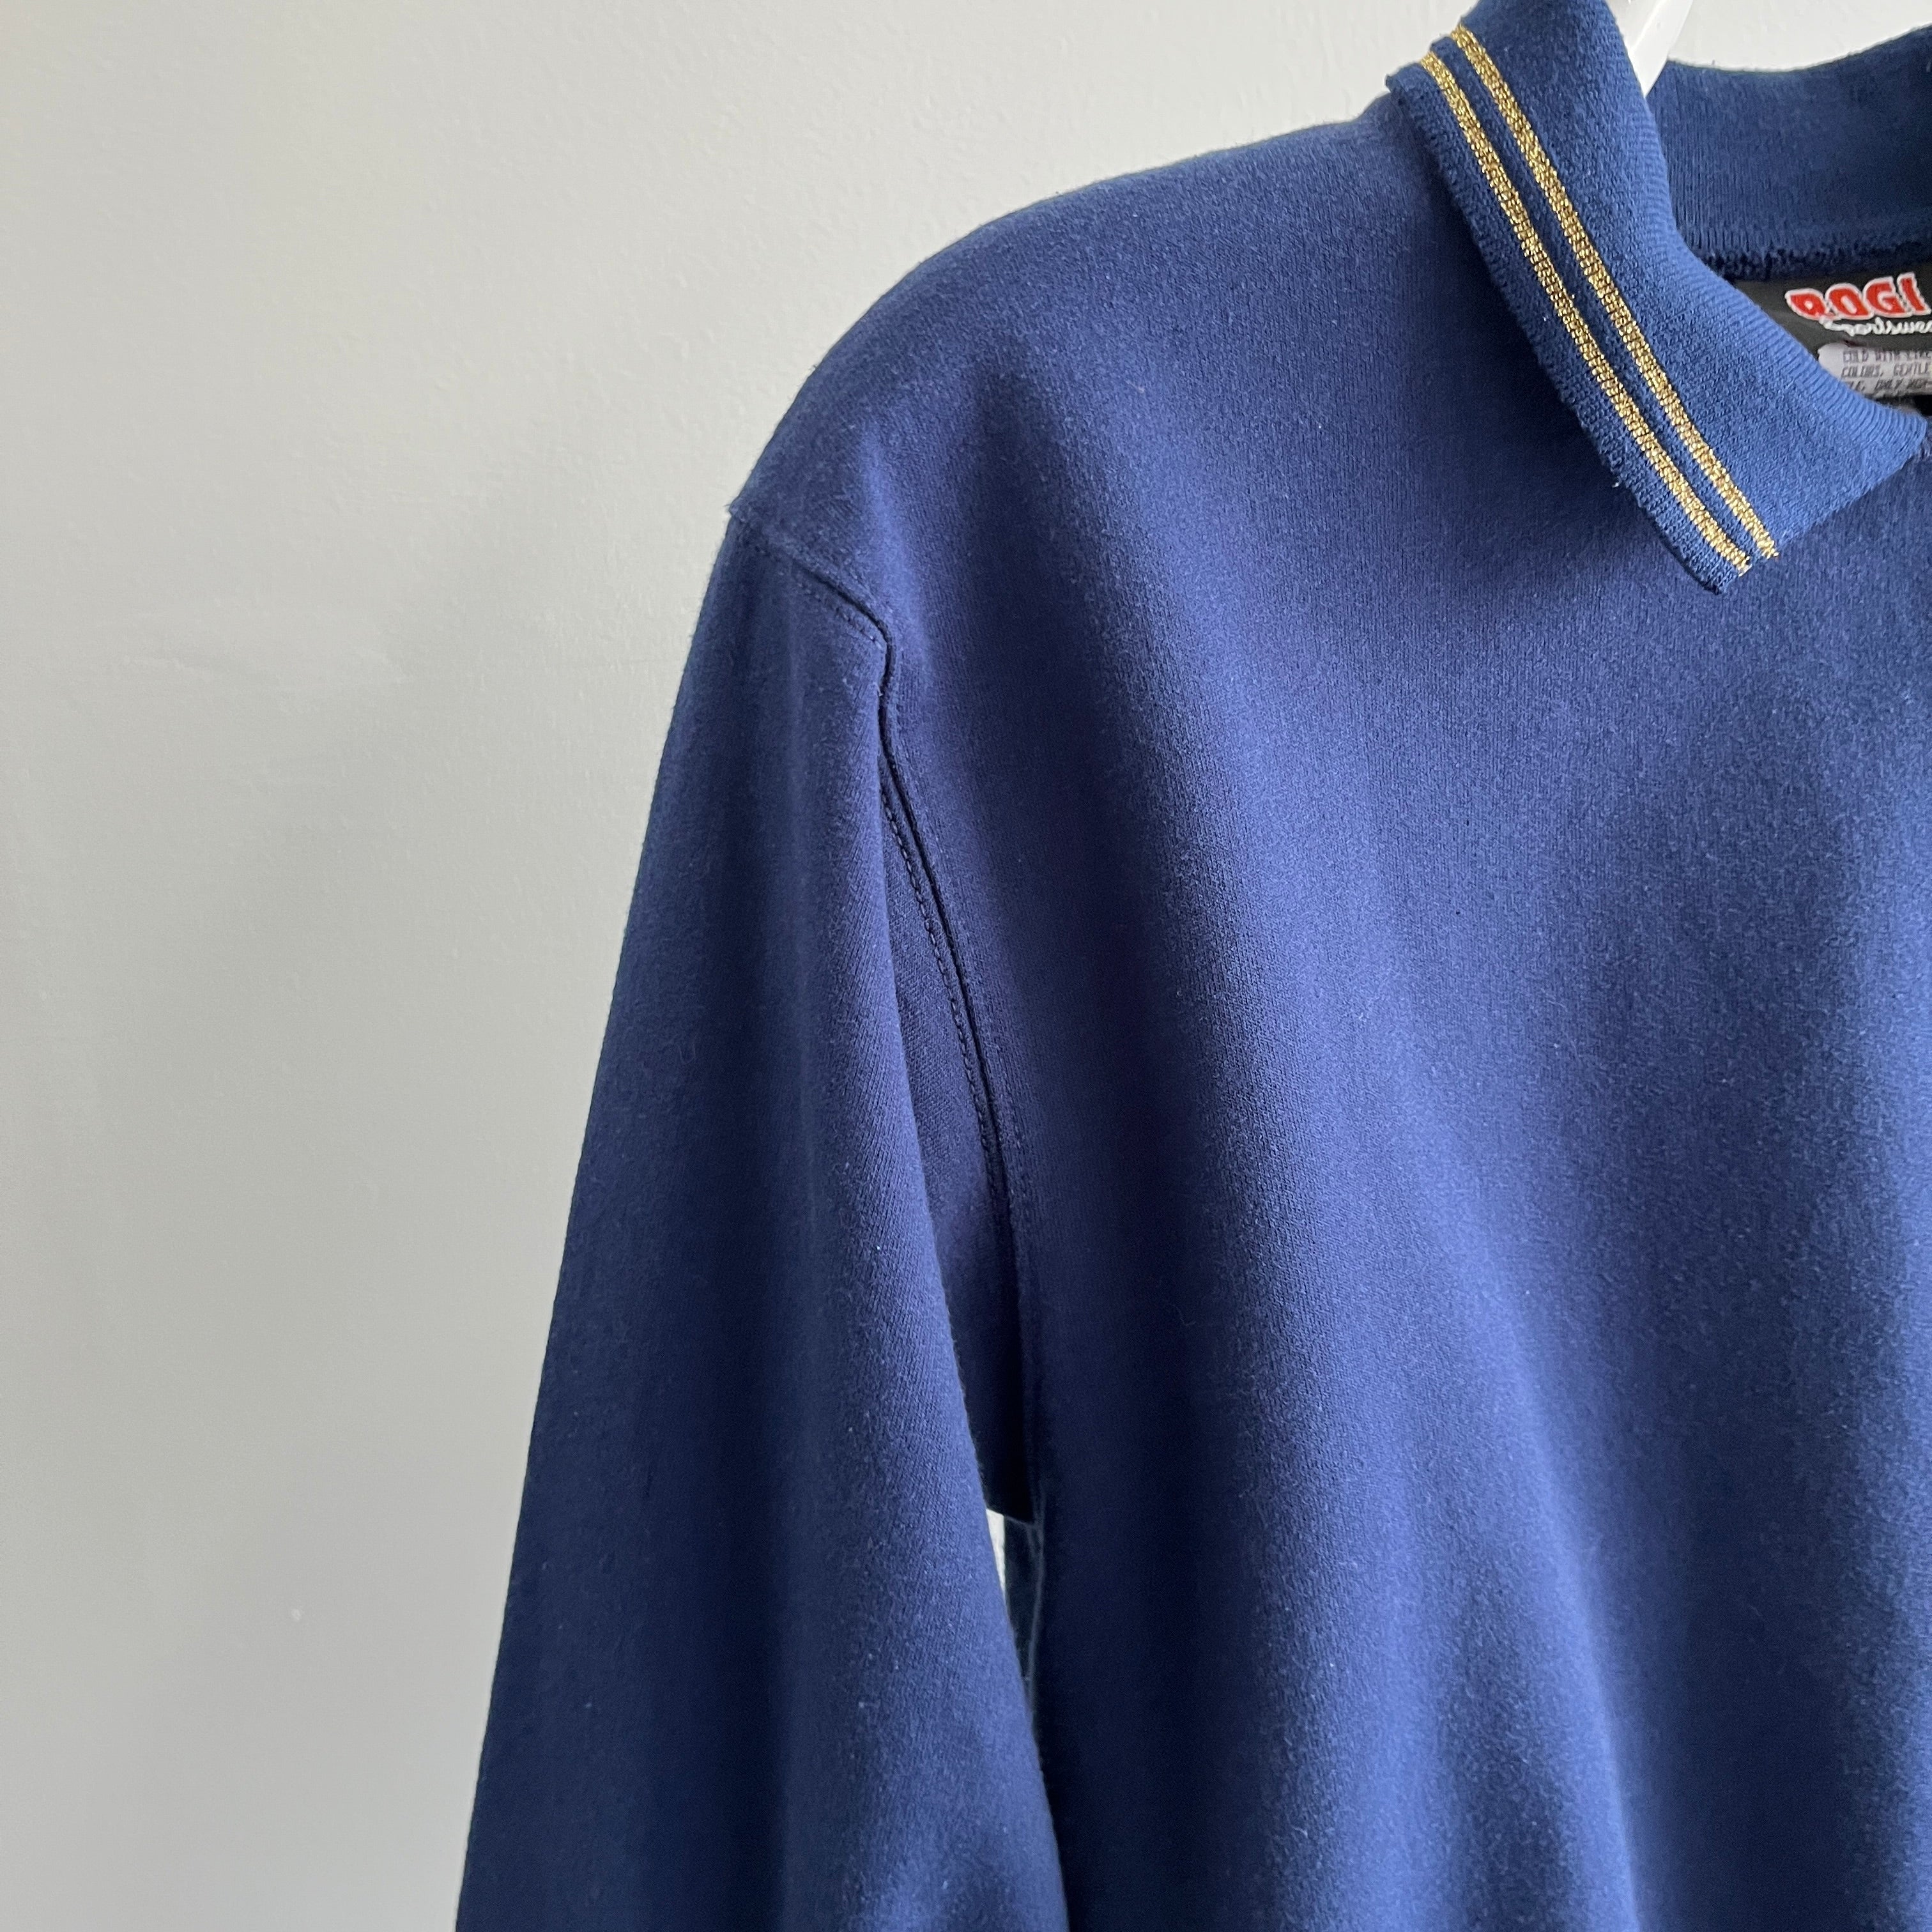 1980s Collared Sweatshirt For Extra Flair